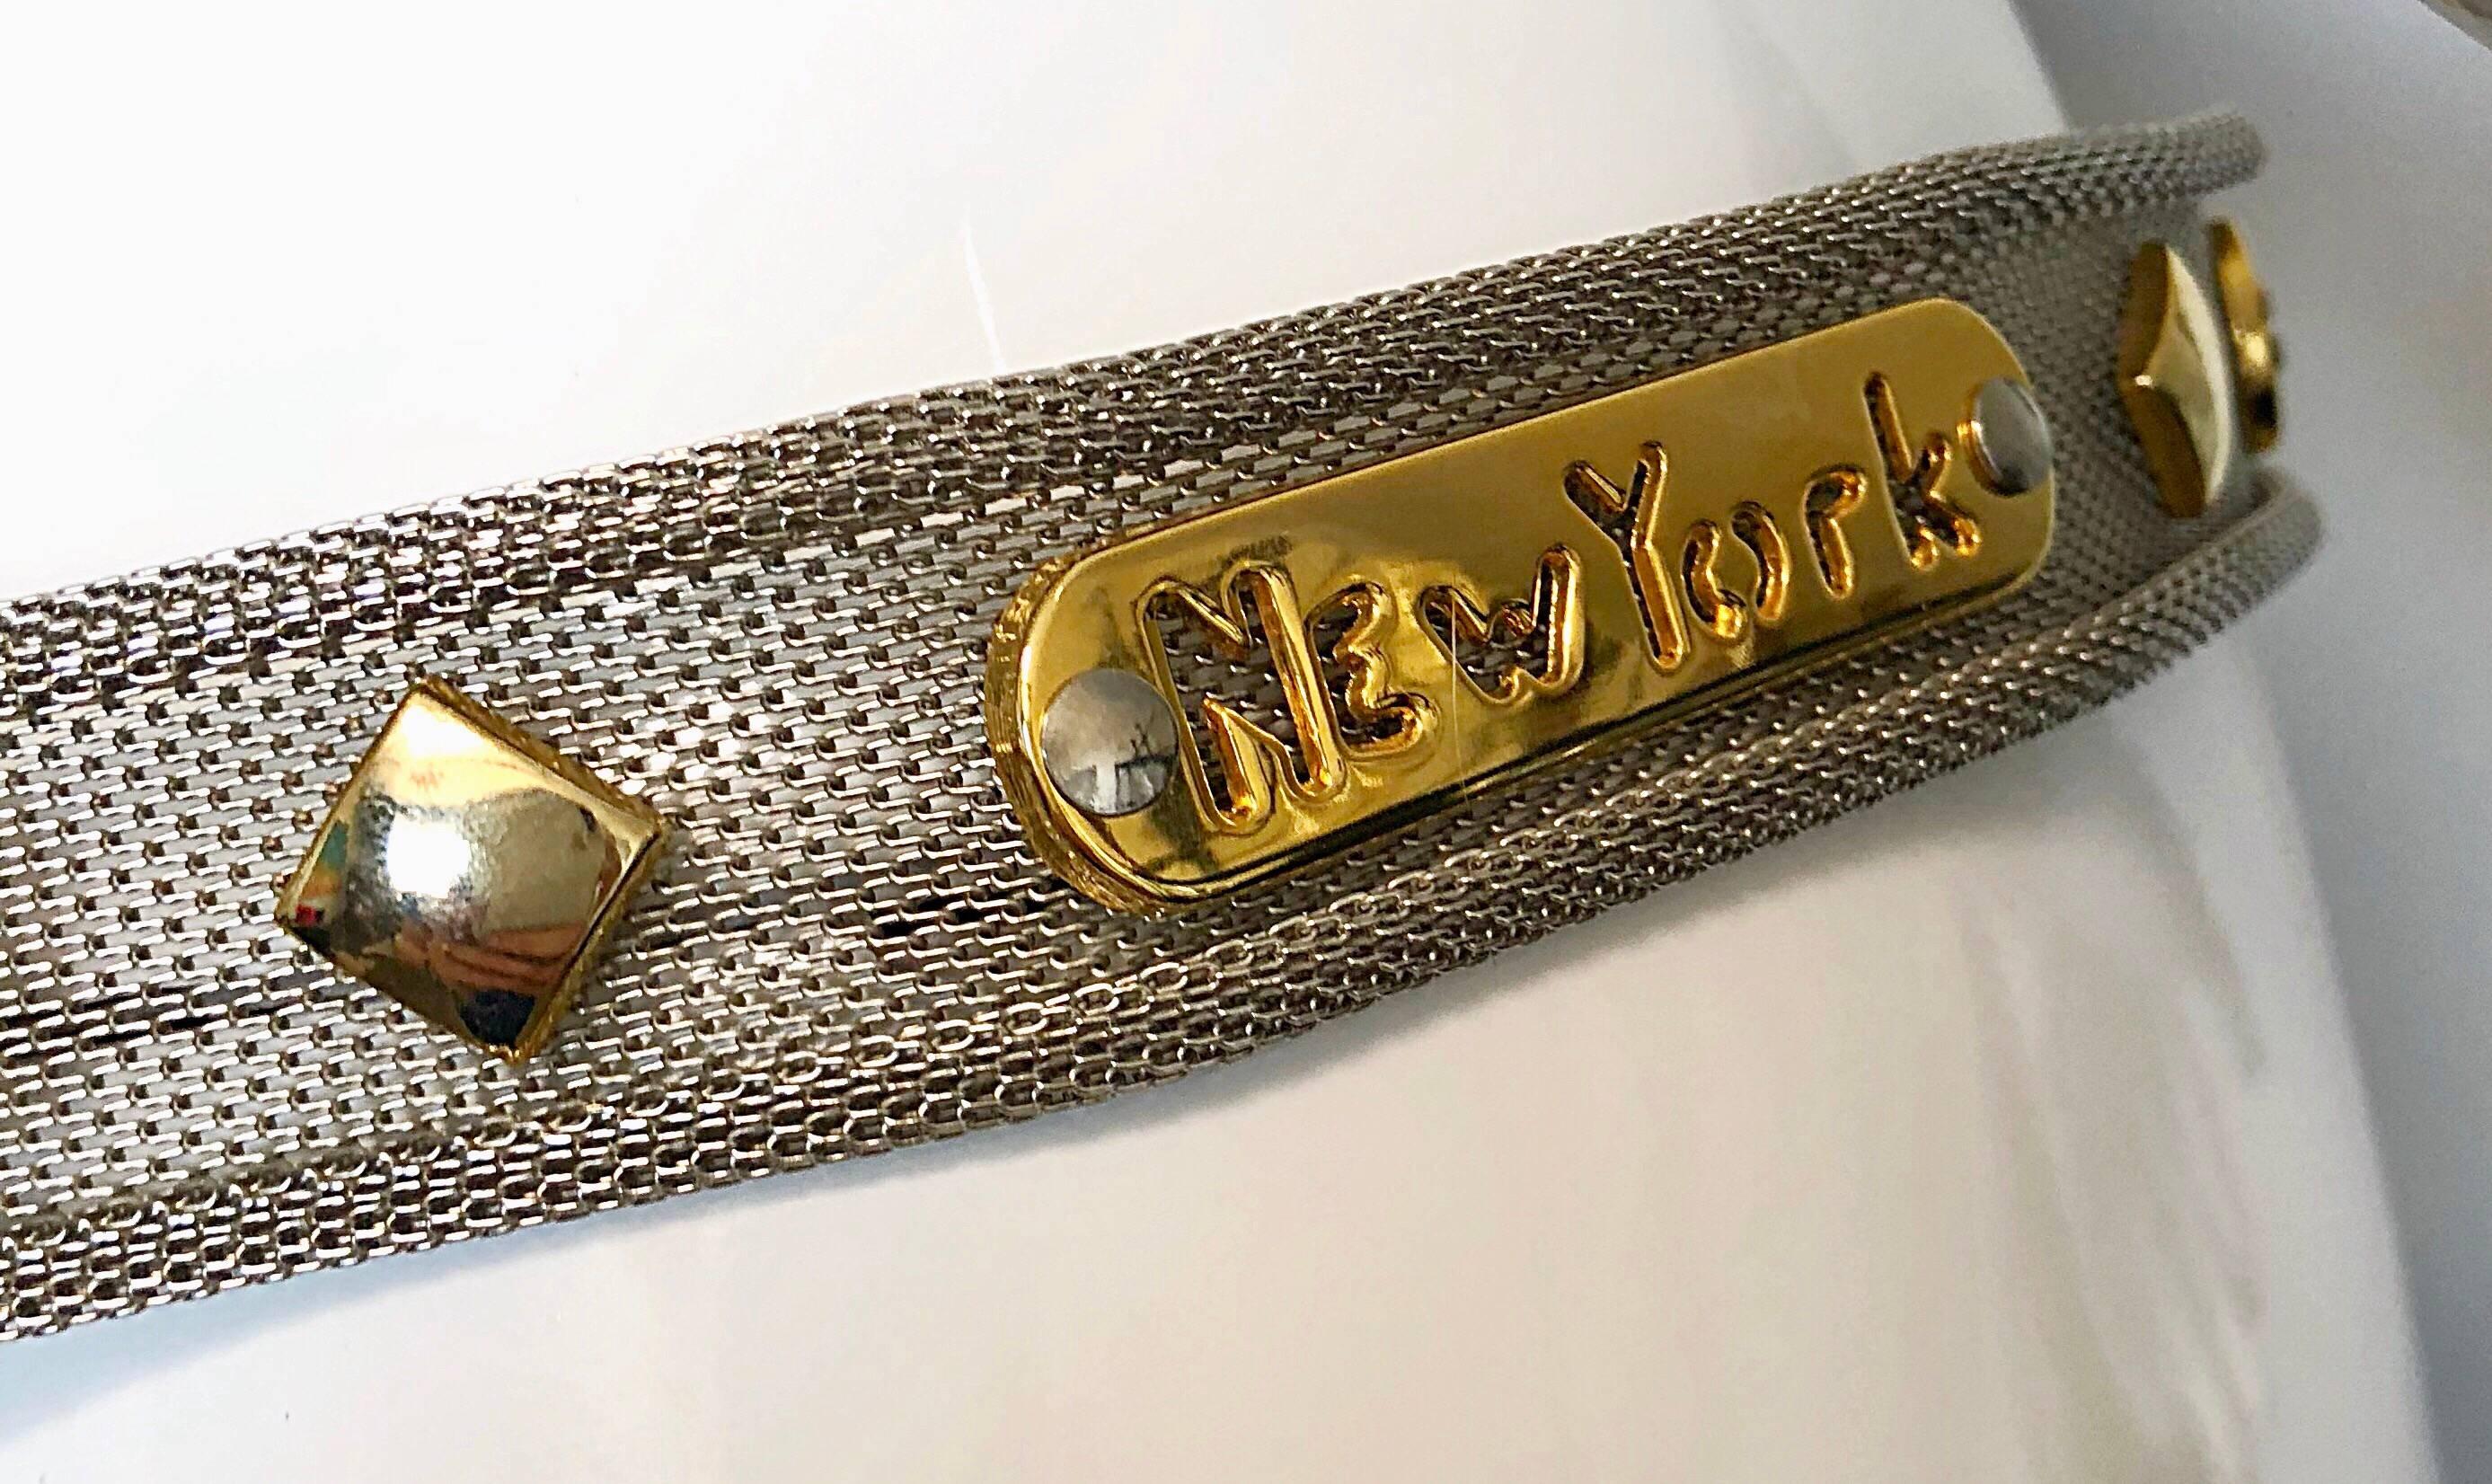 Fabulous 1990s Silver Gold Novelty Souvenir Vintage 90s Metal Mesh Vintage Belt In Excellent Condition For Sale In San Diego, CA